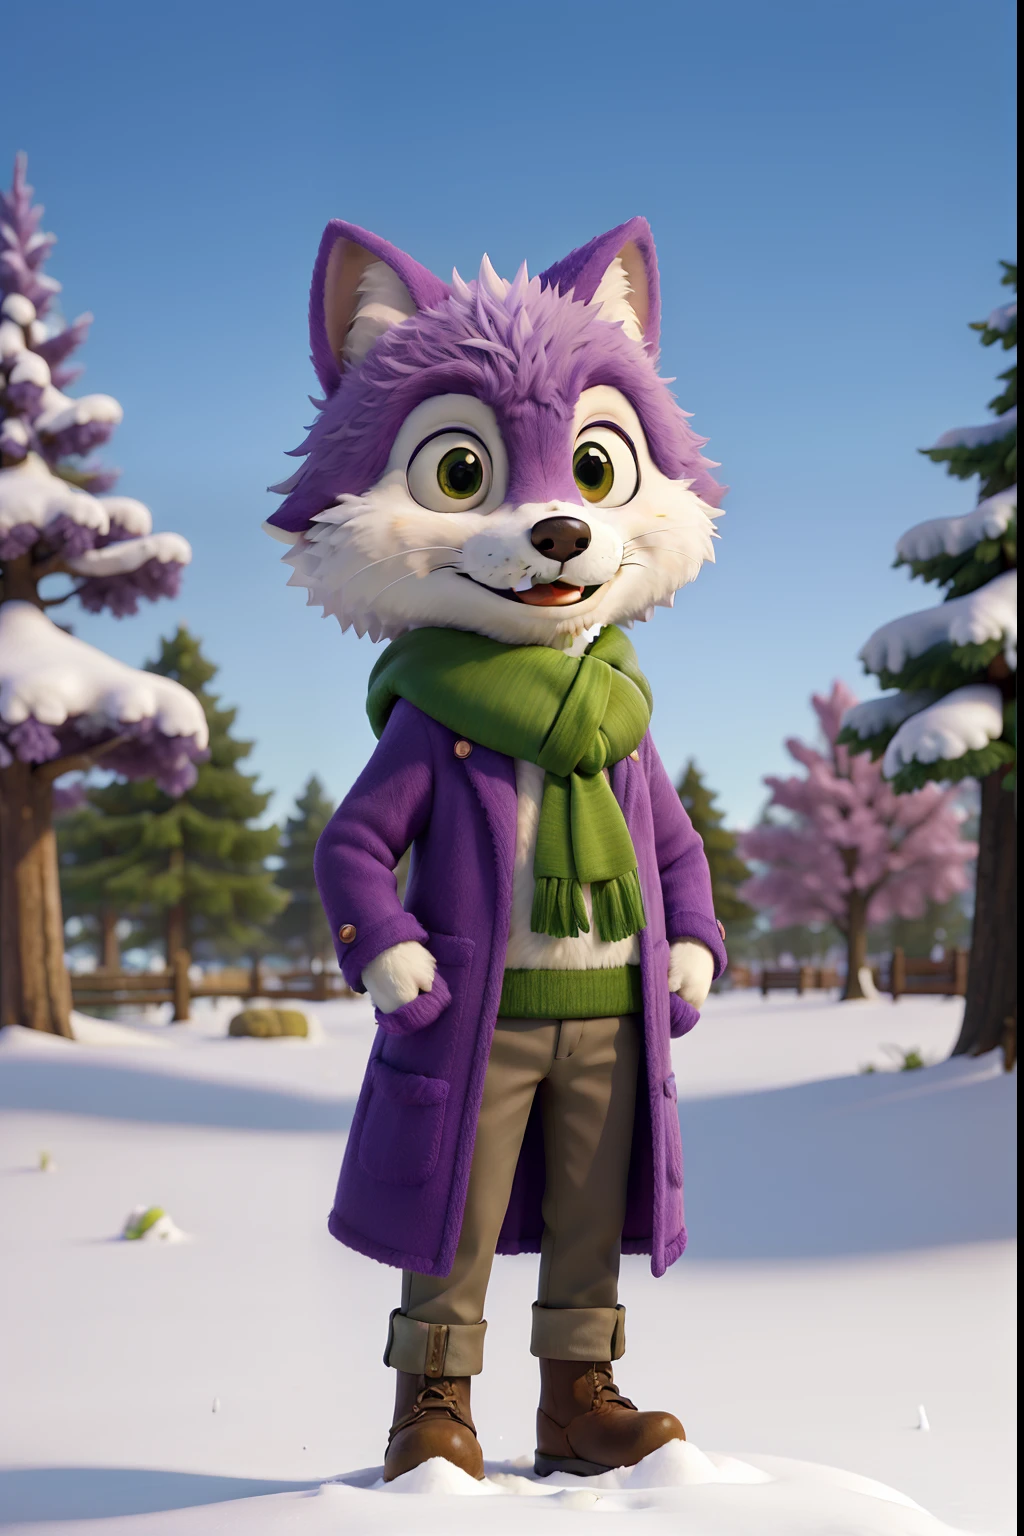 Masterpeace, beste quality, a snow fox, wearing a purple coat and green scarf, Standing in the park